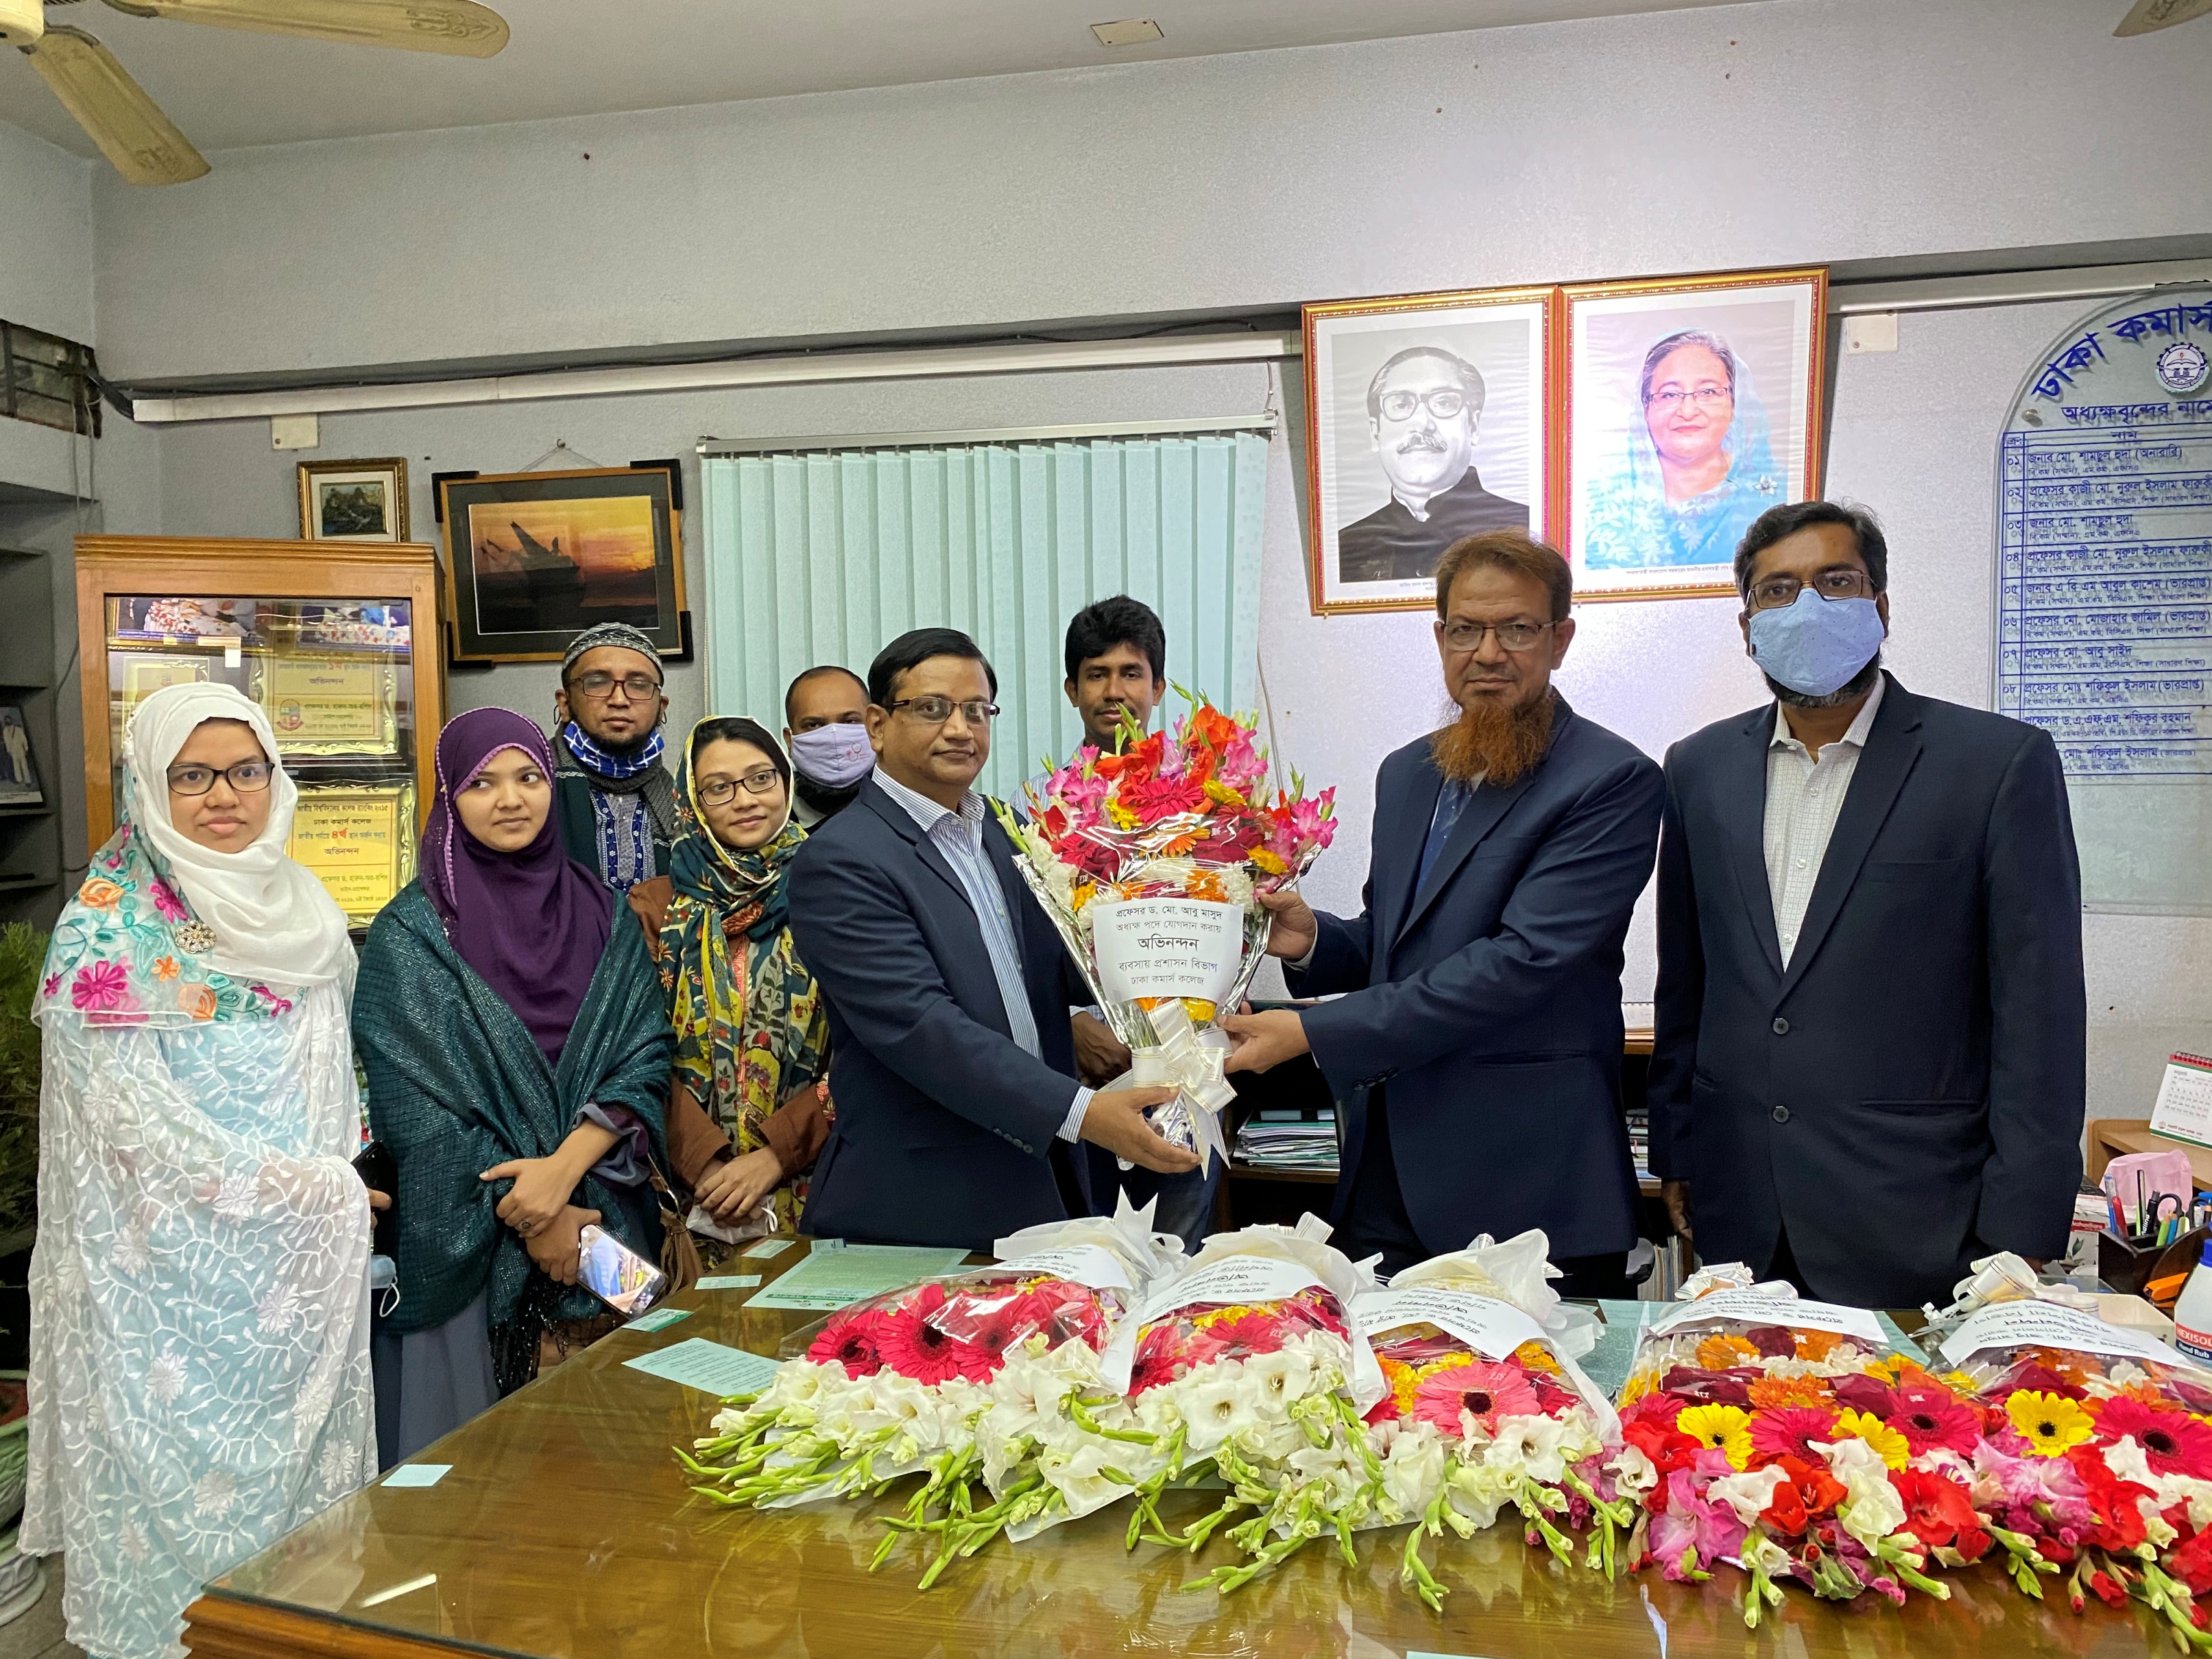 Reception to Principal Prof. Dr. Md. Abu Masud by Business Administration Department